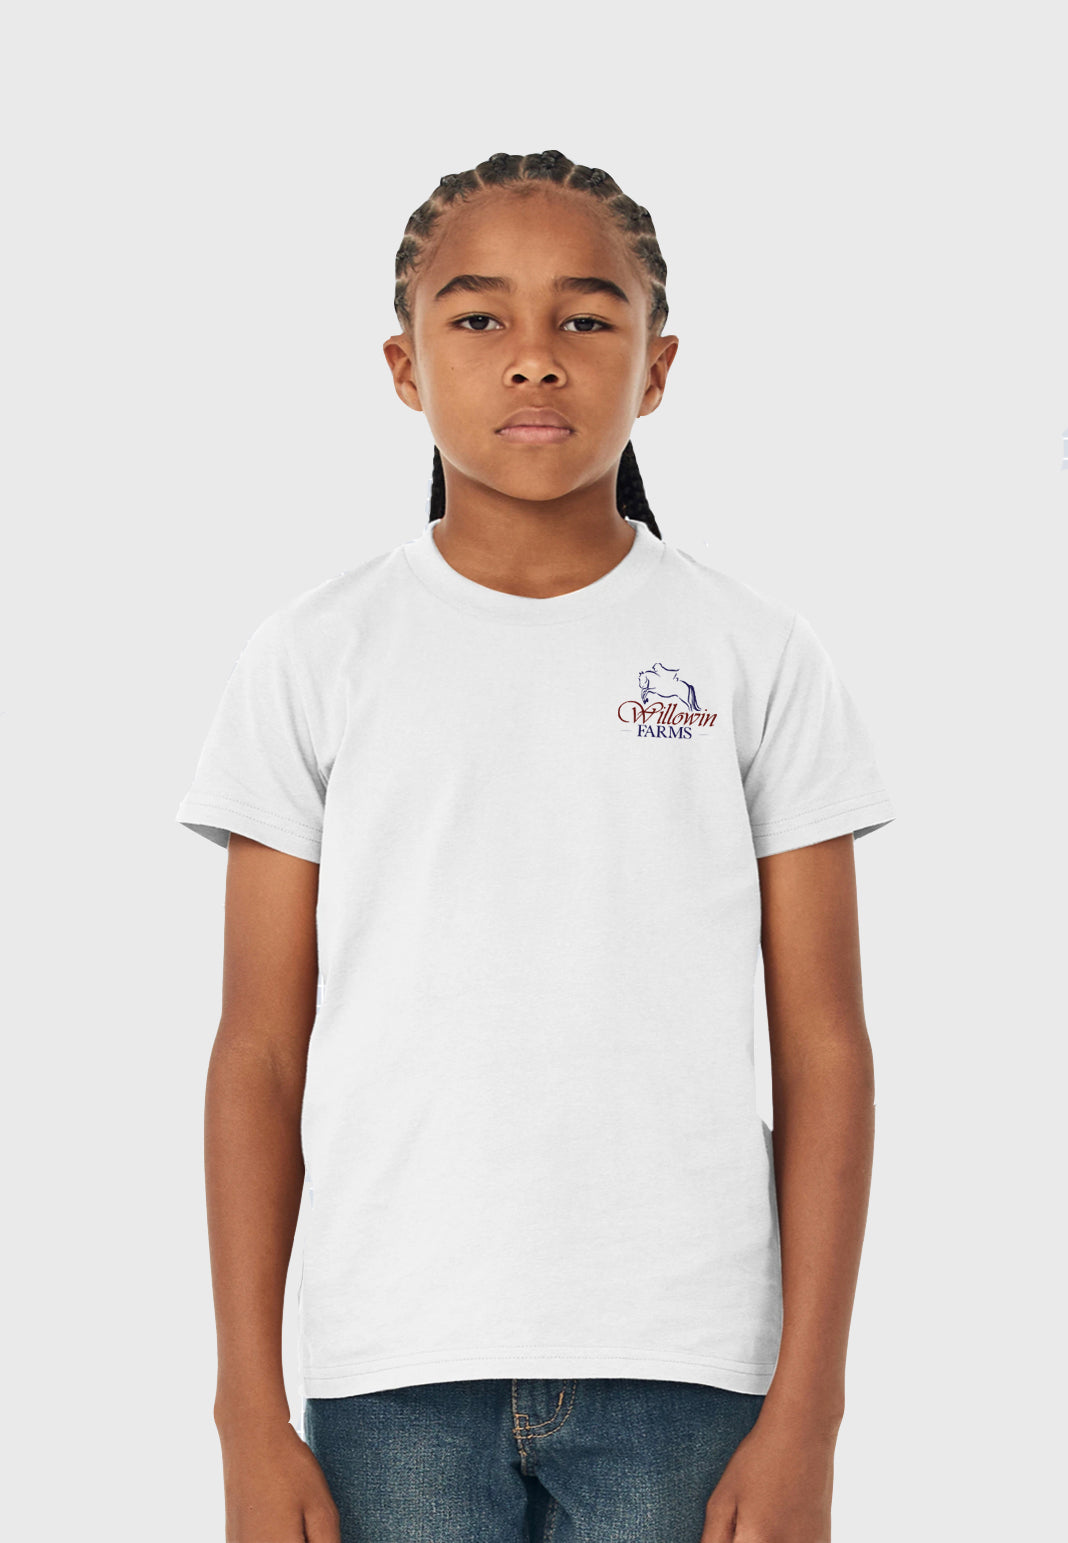 Willowin Farms BELLA+CANVAS ® Youth Jersey Short Sleeve Tee (Unisex) - Navy or White